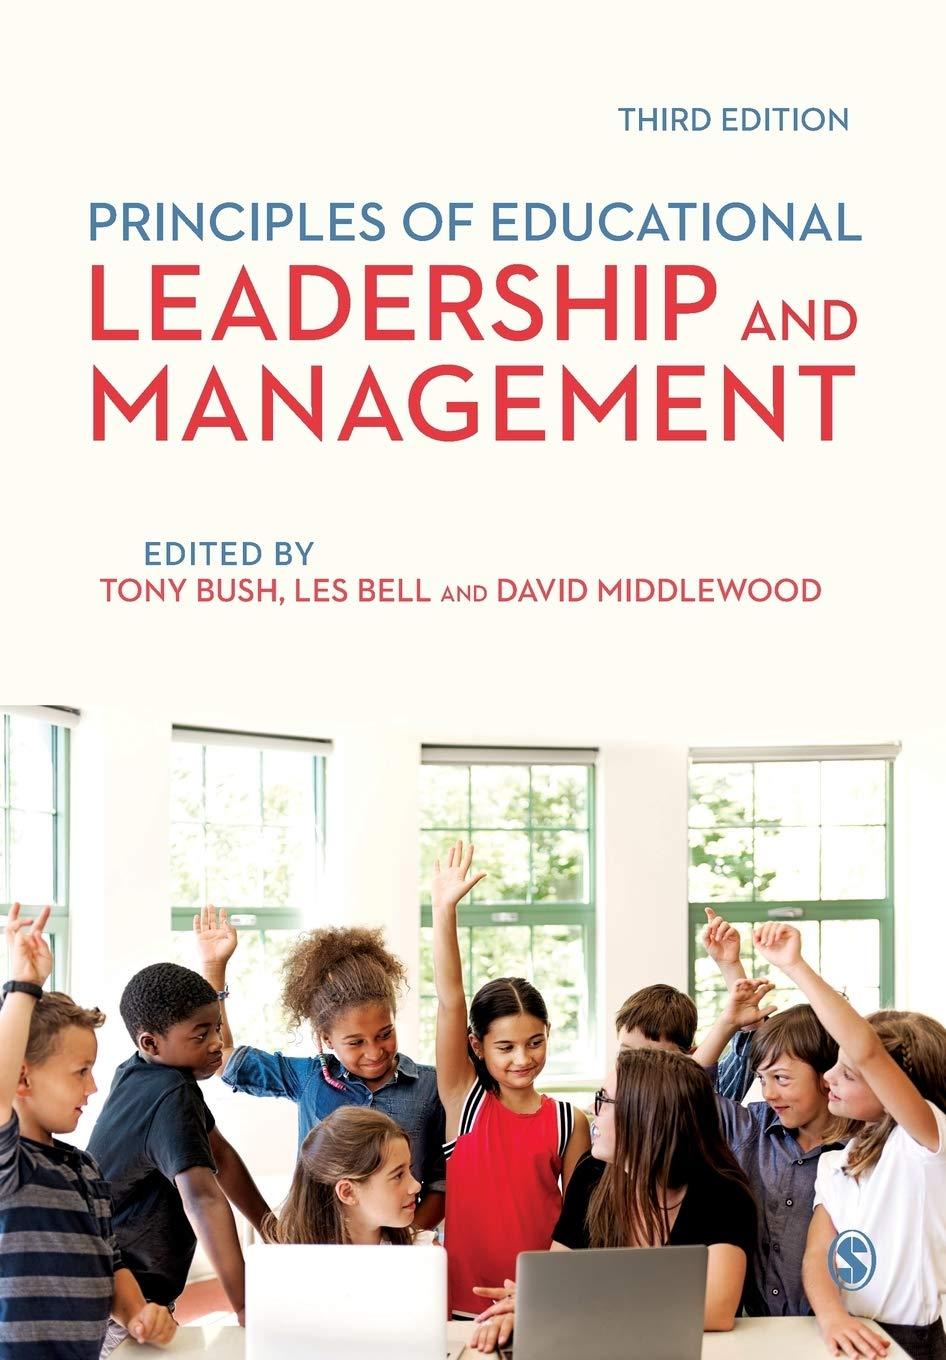 principles of educational leadership and management 3rd edition tony bush, les bell, david middlewood